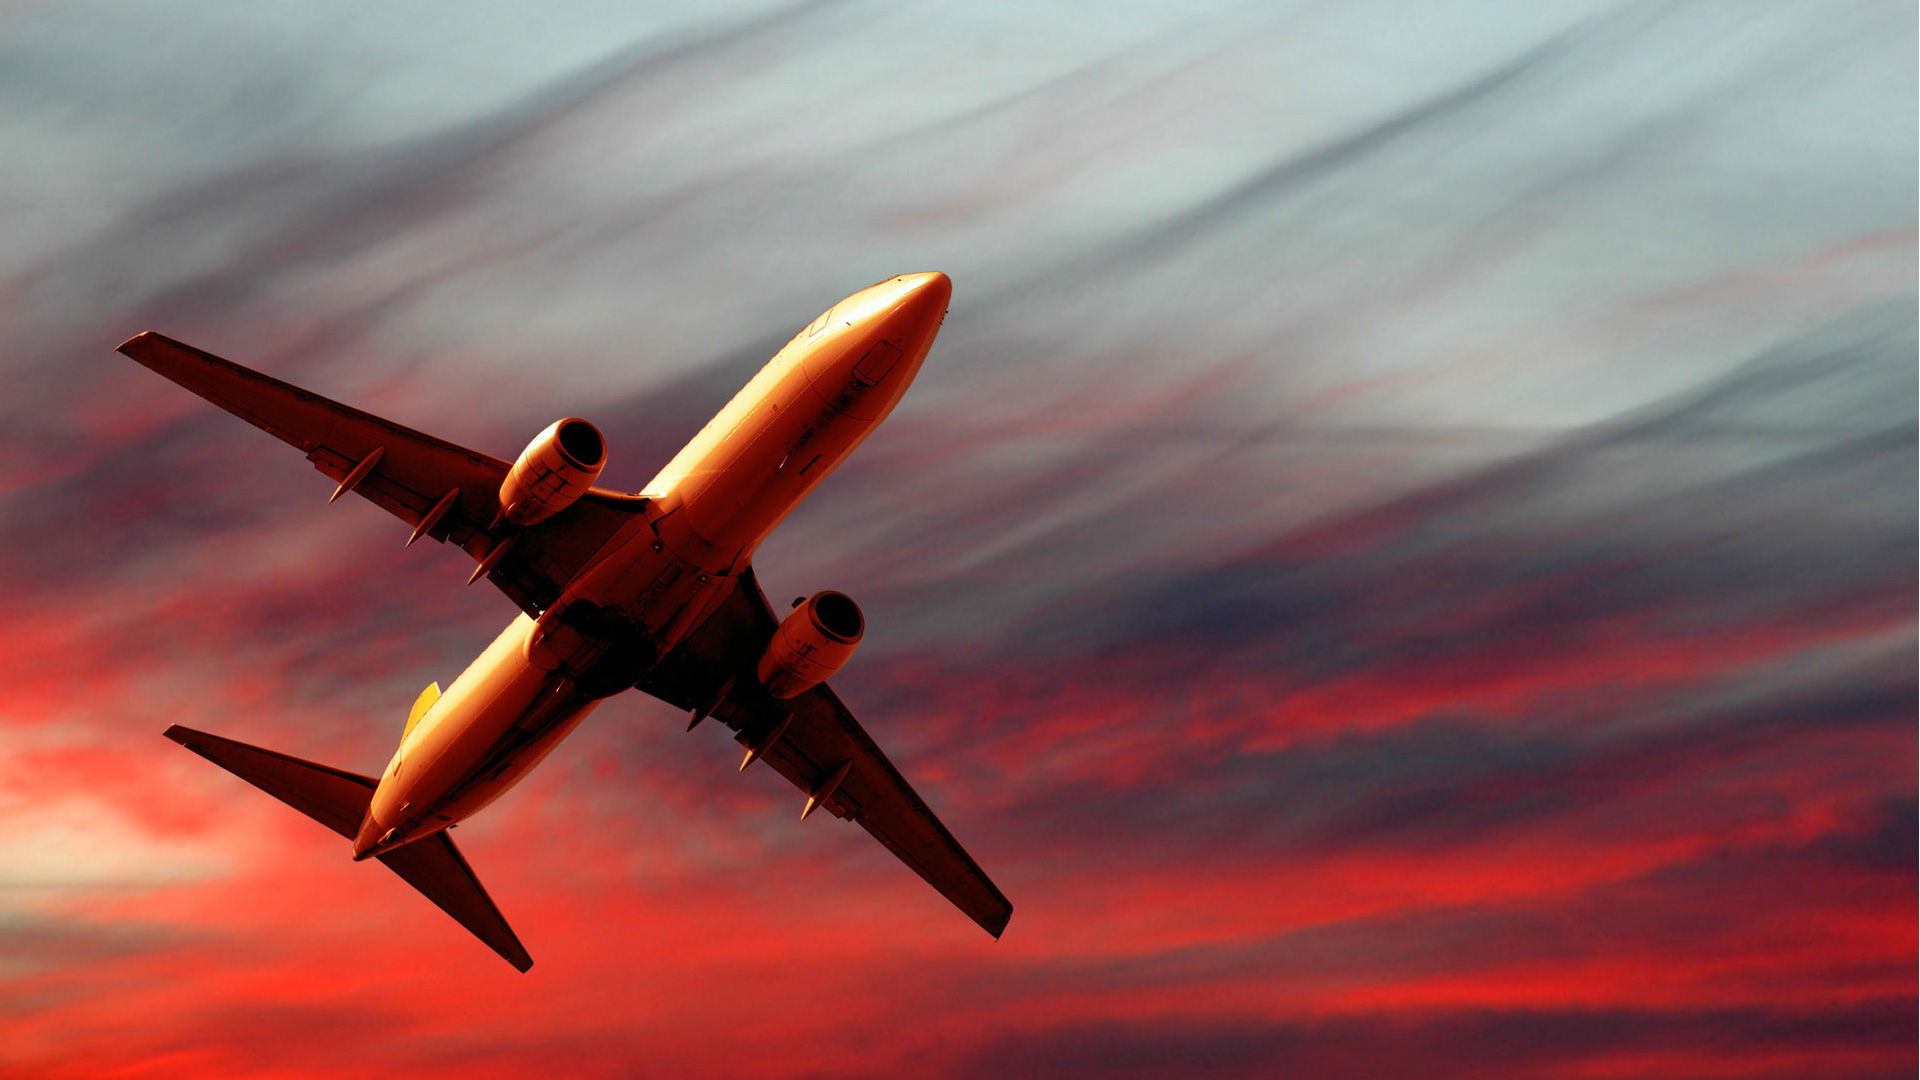 plane_at_red_sunset_1920x1080